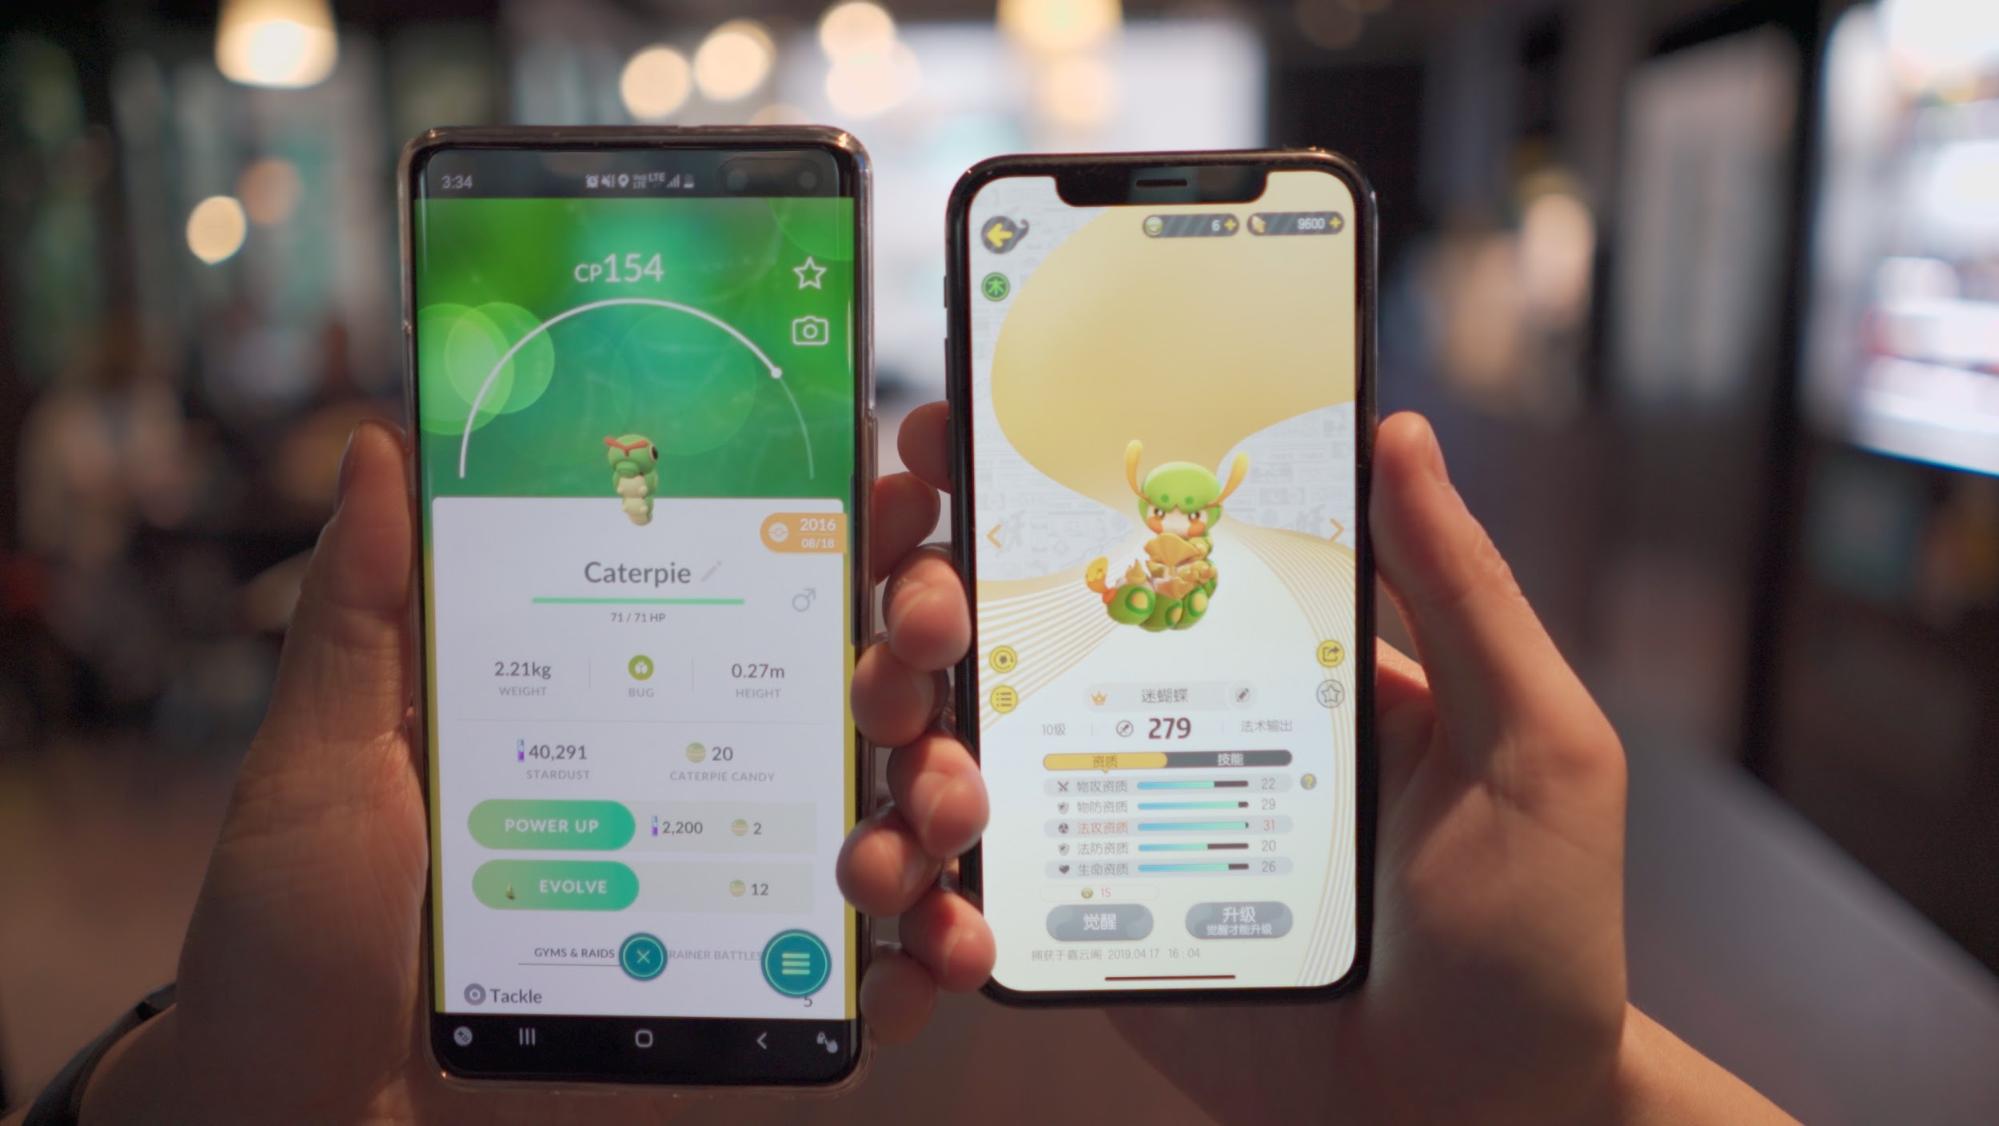 Not sure how Tencent’s version of Caterpie can move.